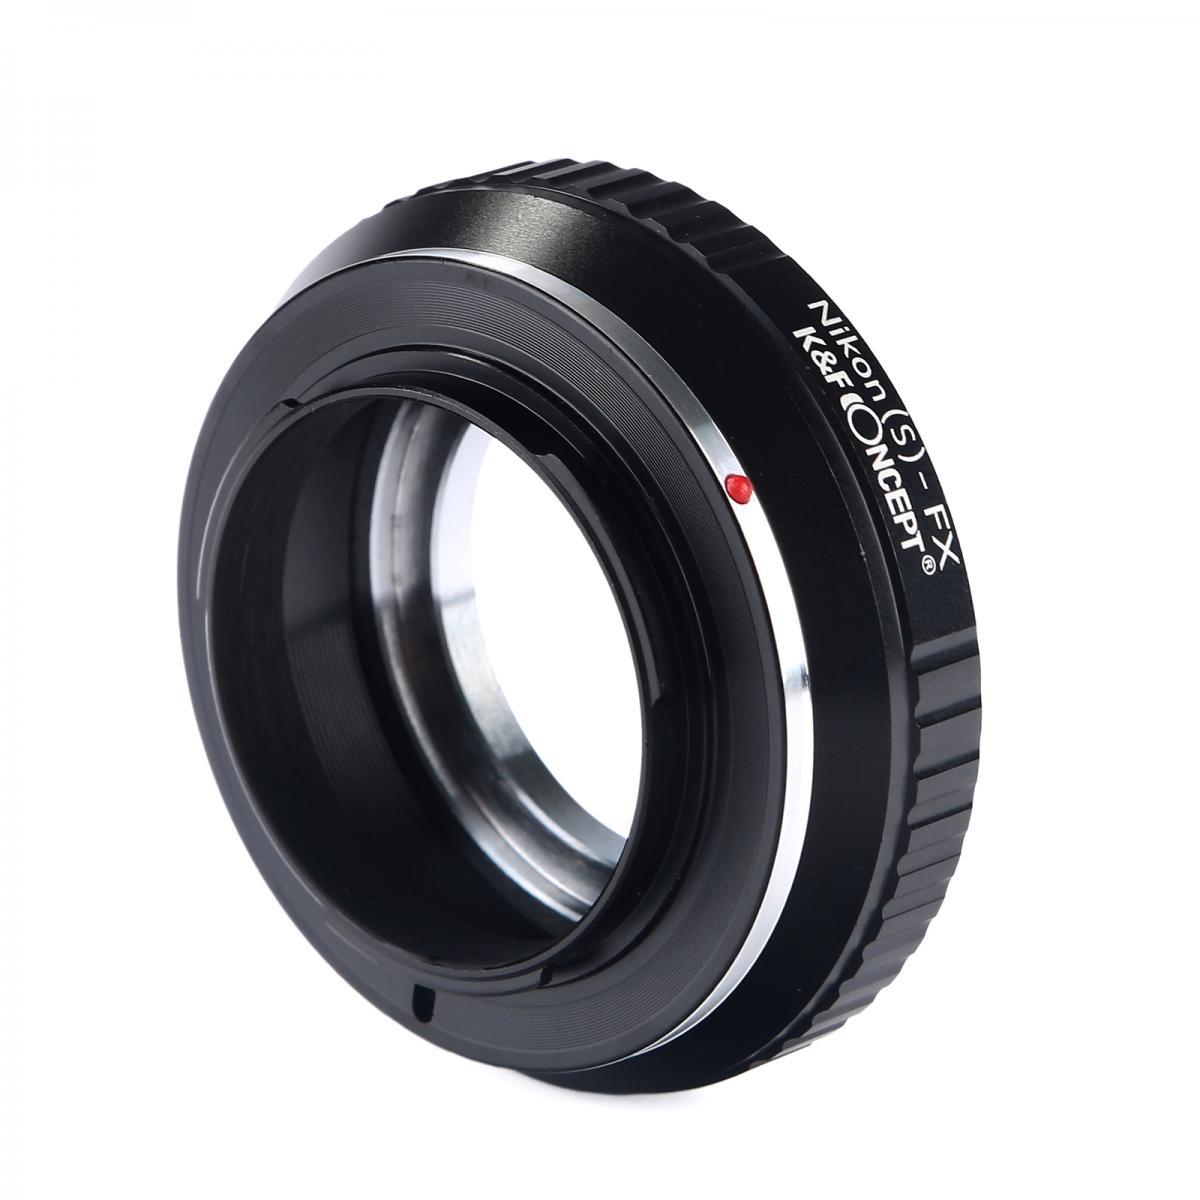 K&F Concept Lens Mount Adapter Compatible with Nikon(s) Mount Lens to FX Lens Camera Body 